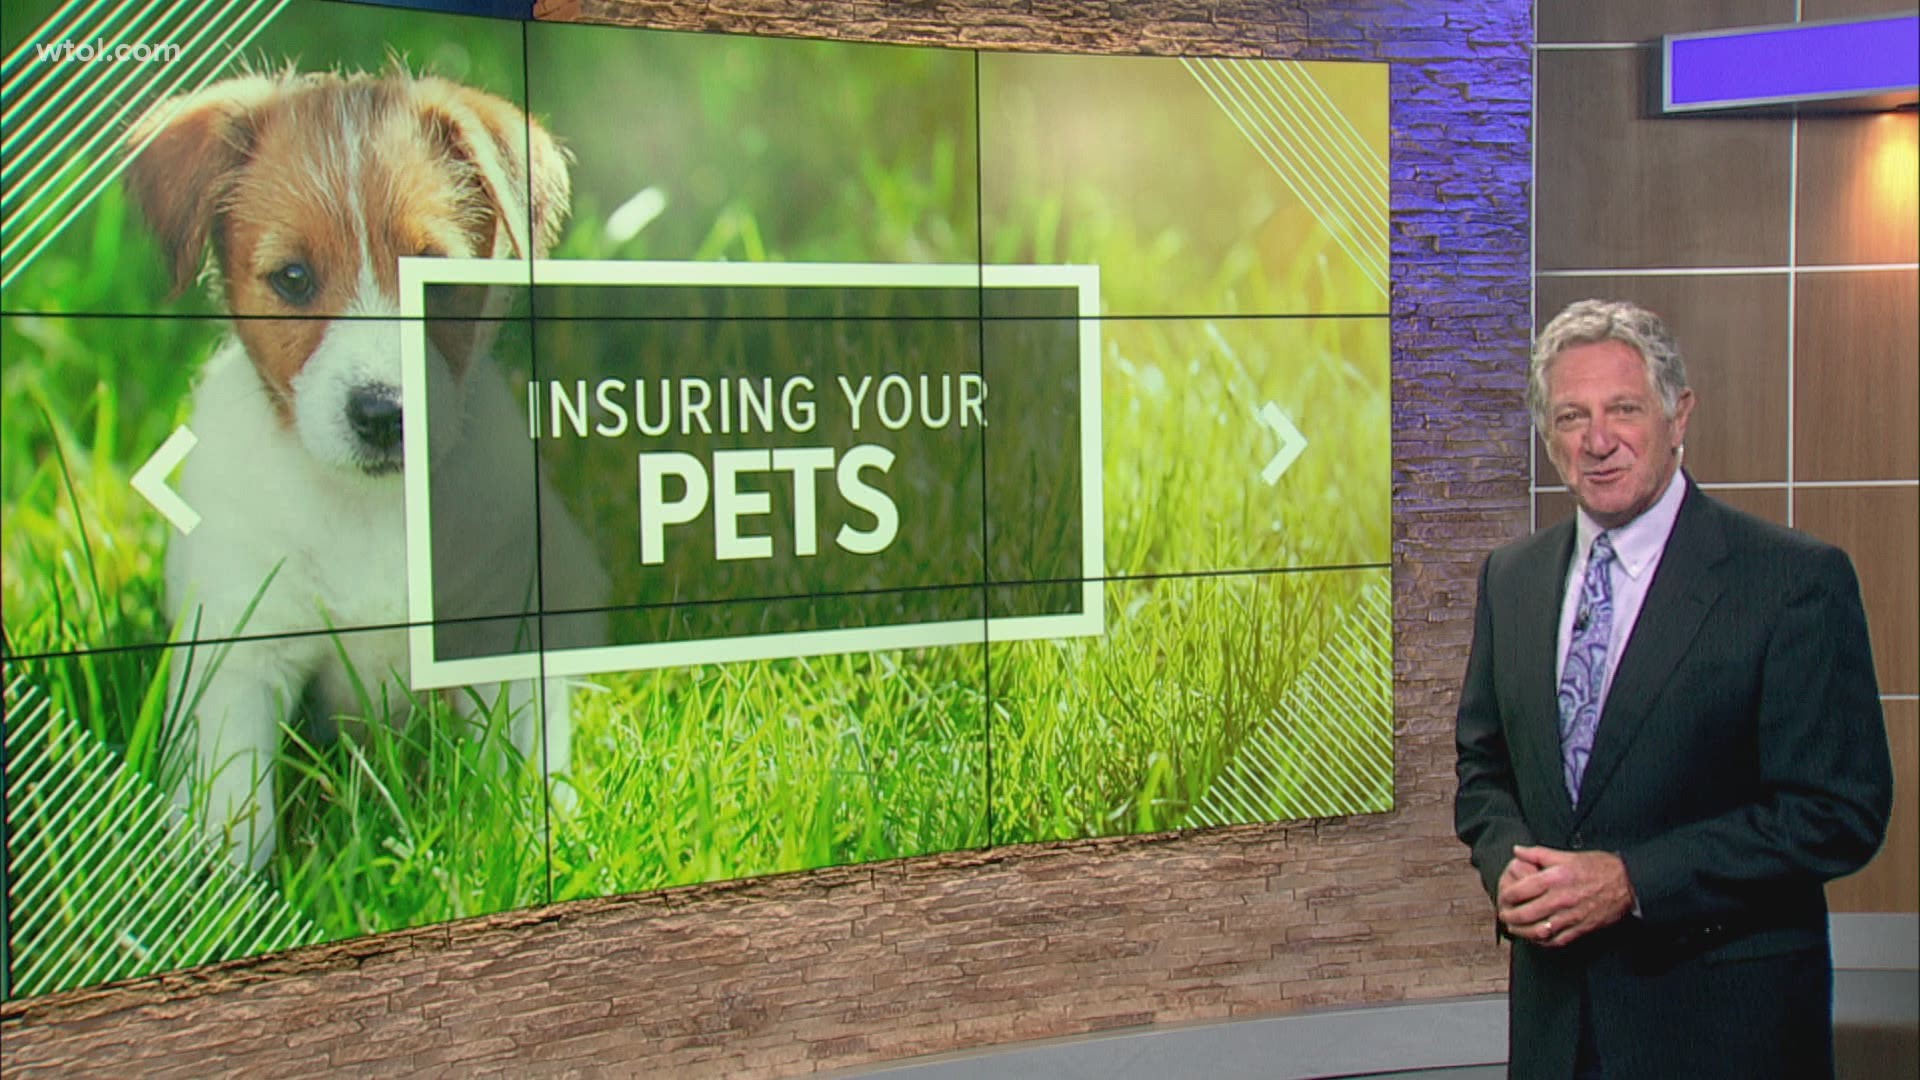 Pets have become family members and when medical bills can rack up to thousands of dollars insurance might be a way to save money.